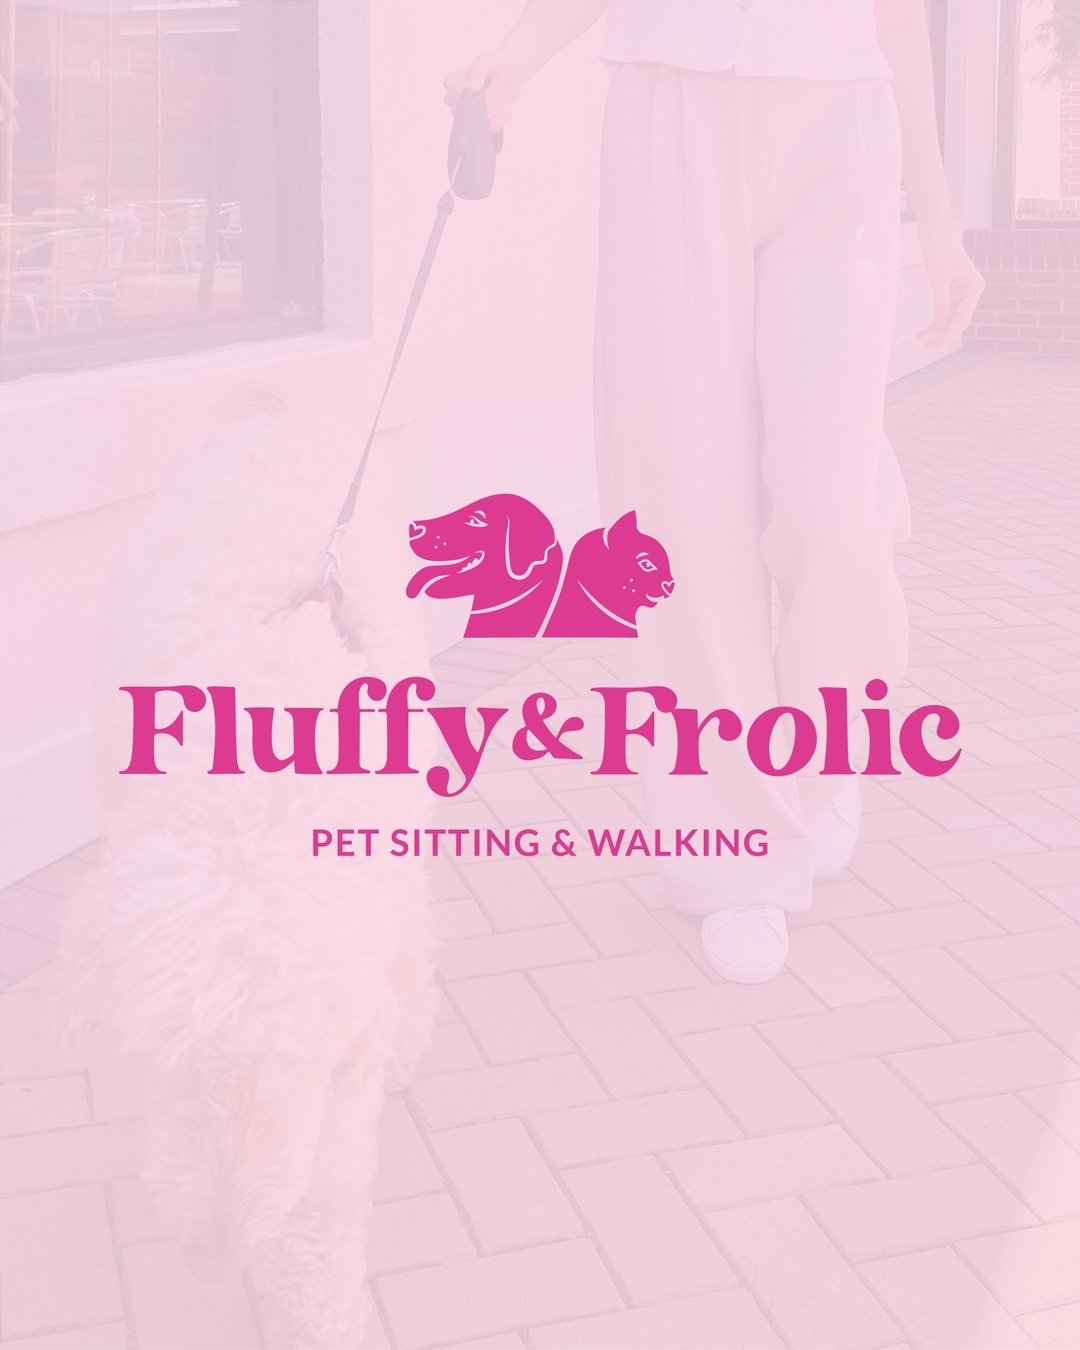 NEW WORK &rarr; Fluffy &amp; Frolic

Fluffy &amp; Frolic is a professional pet sitting &amp; walking business in Charlotte, NC. Lindsey, the Founder of Fluffy &amp; Frolic, wanted a brand and website that would express to her ideal pet-parents that s